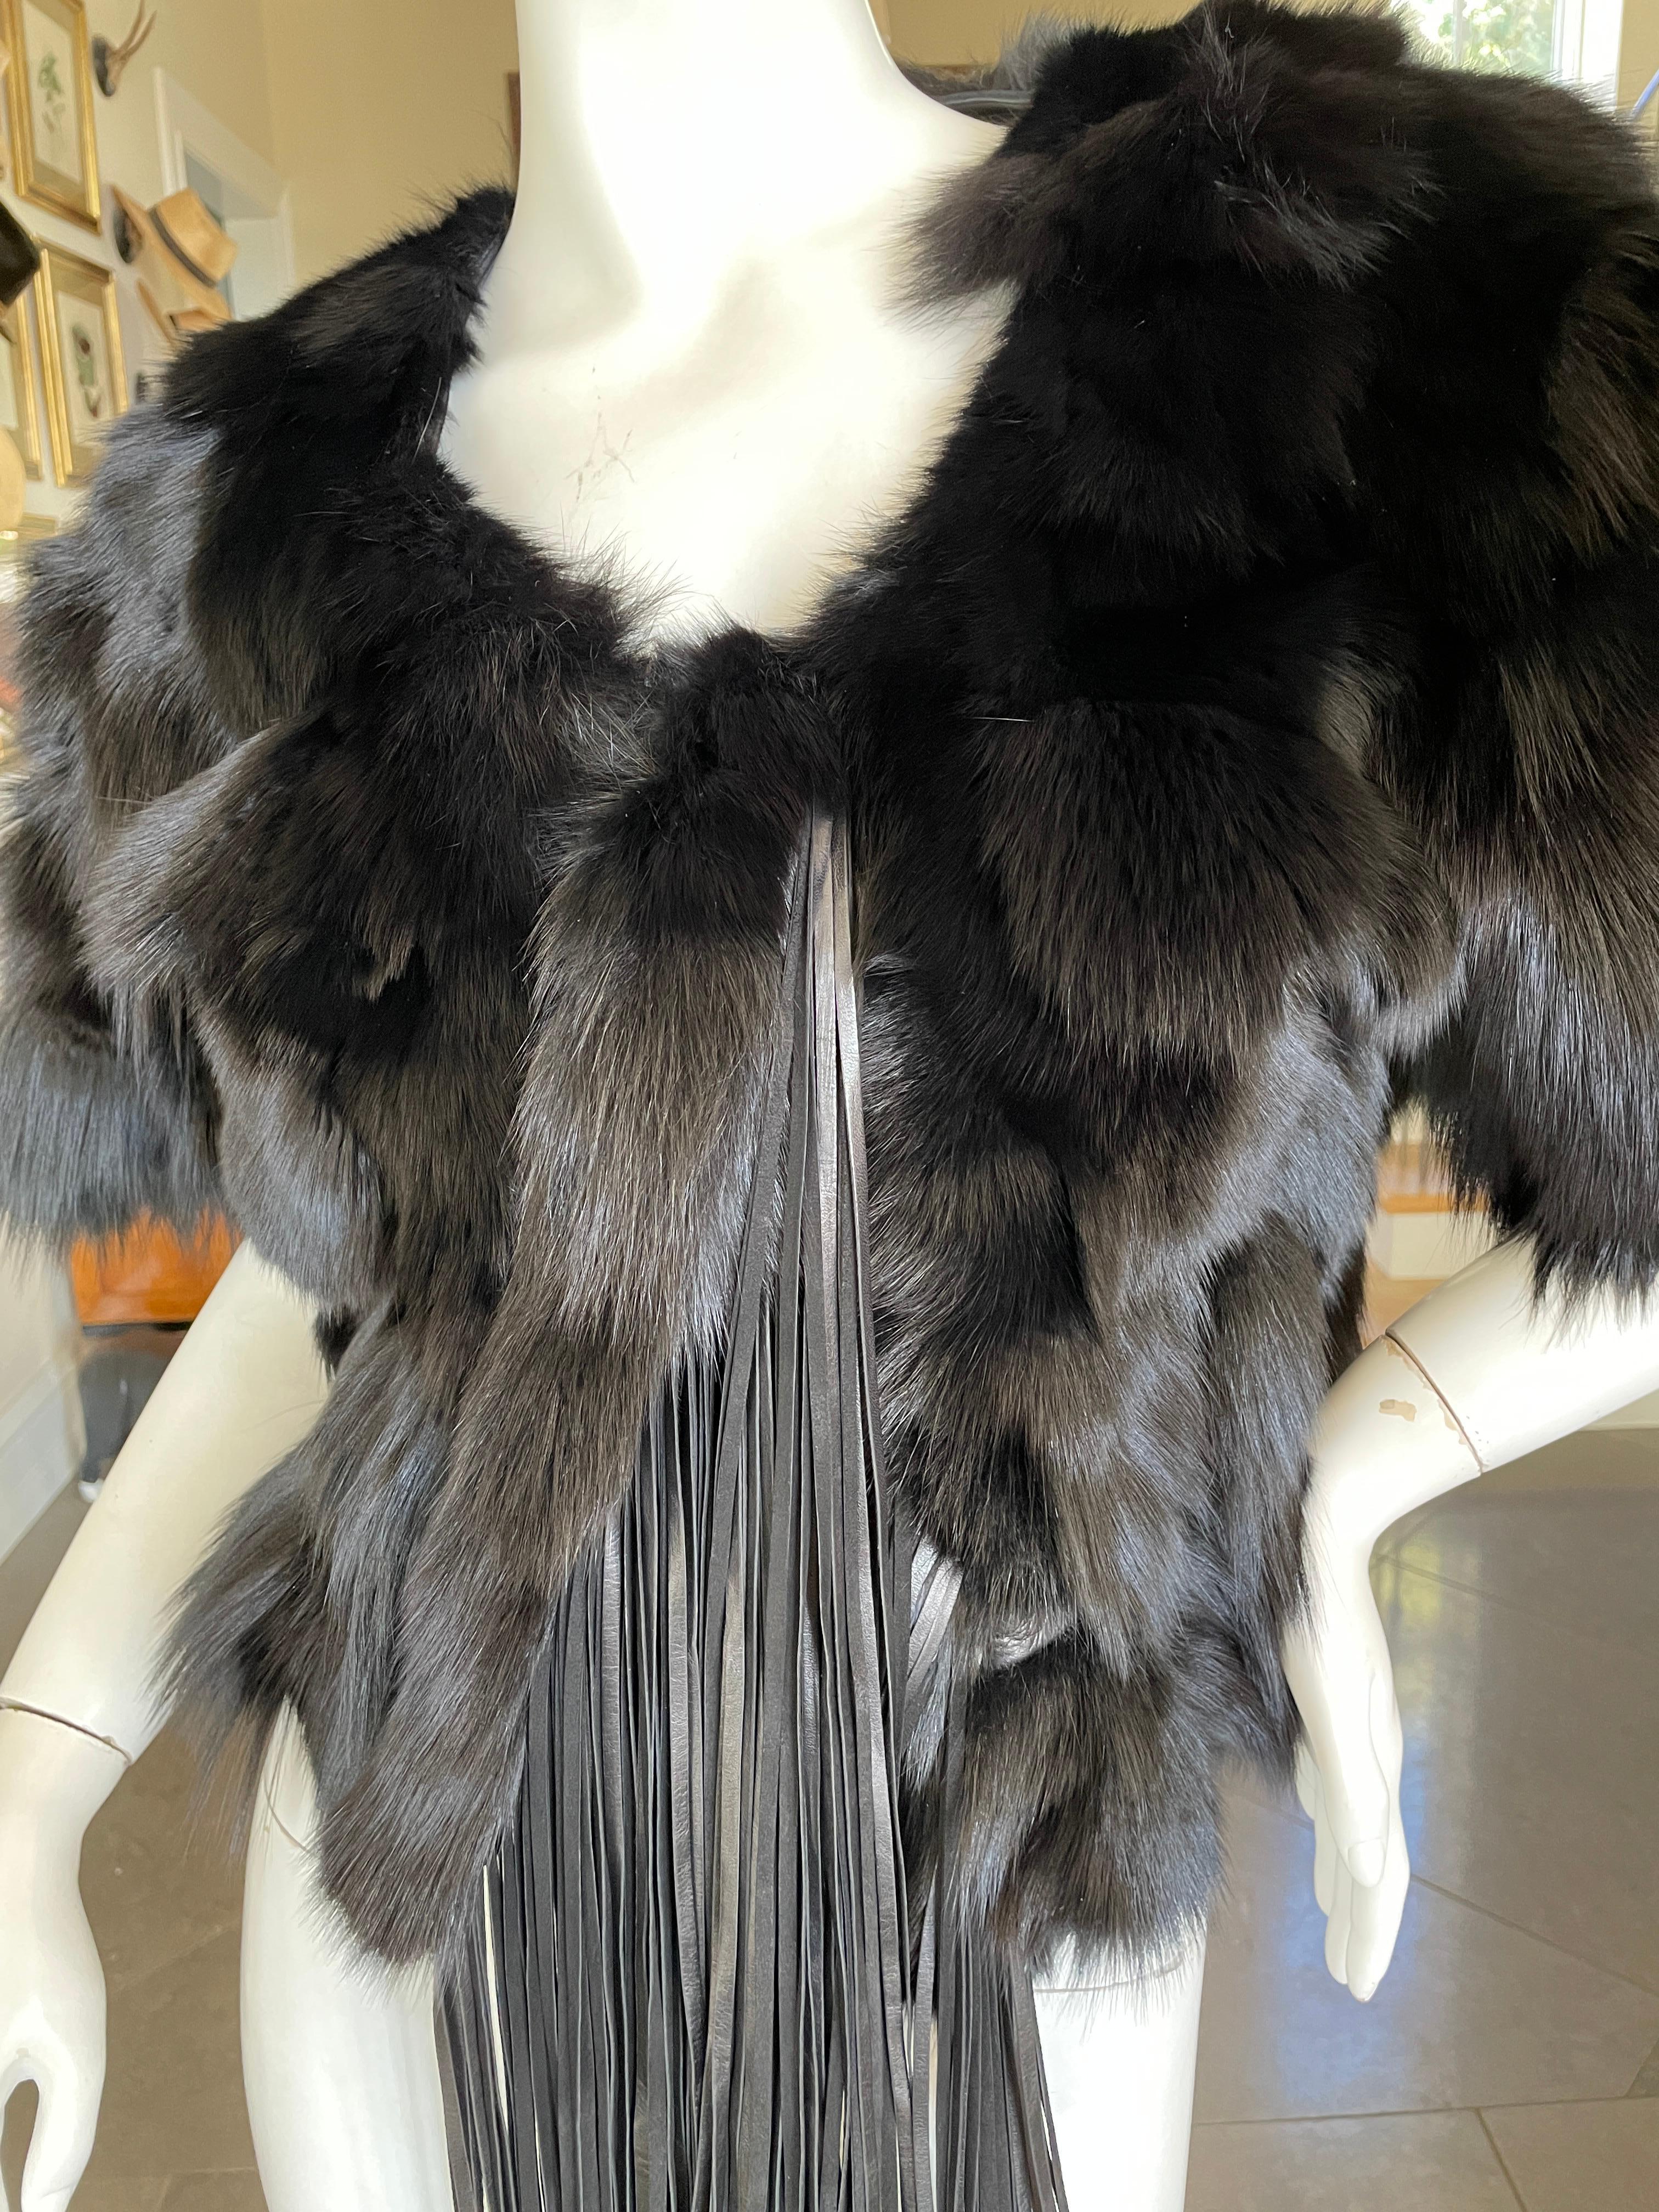 Roberto Cavalli Vintage Black Fox Fur Bolero Jacket with Leather Fringe In Excellent Condition For Sale In Cloverdale, CA